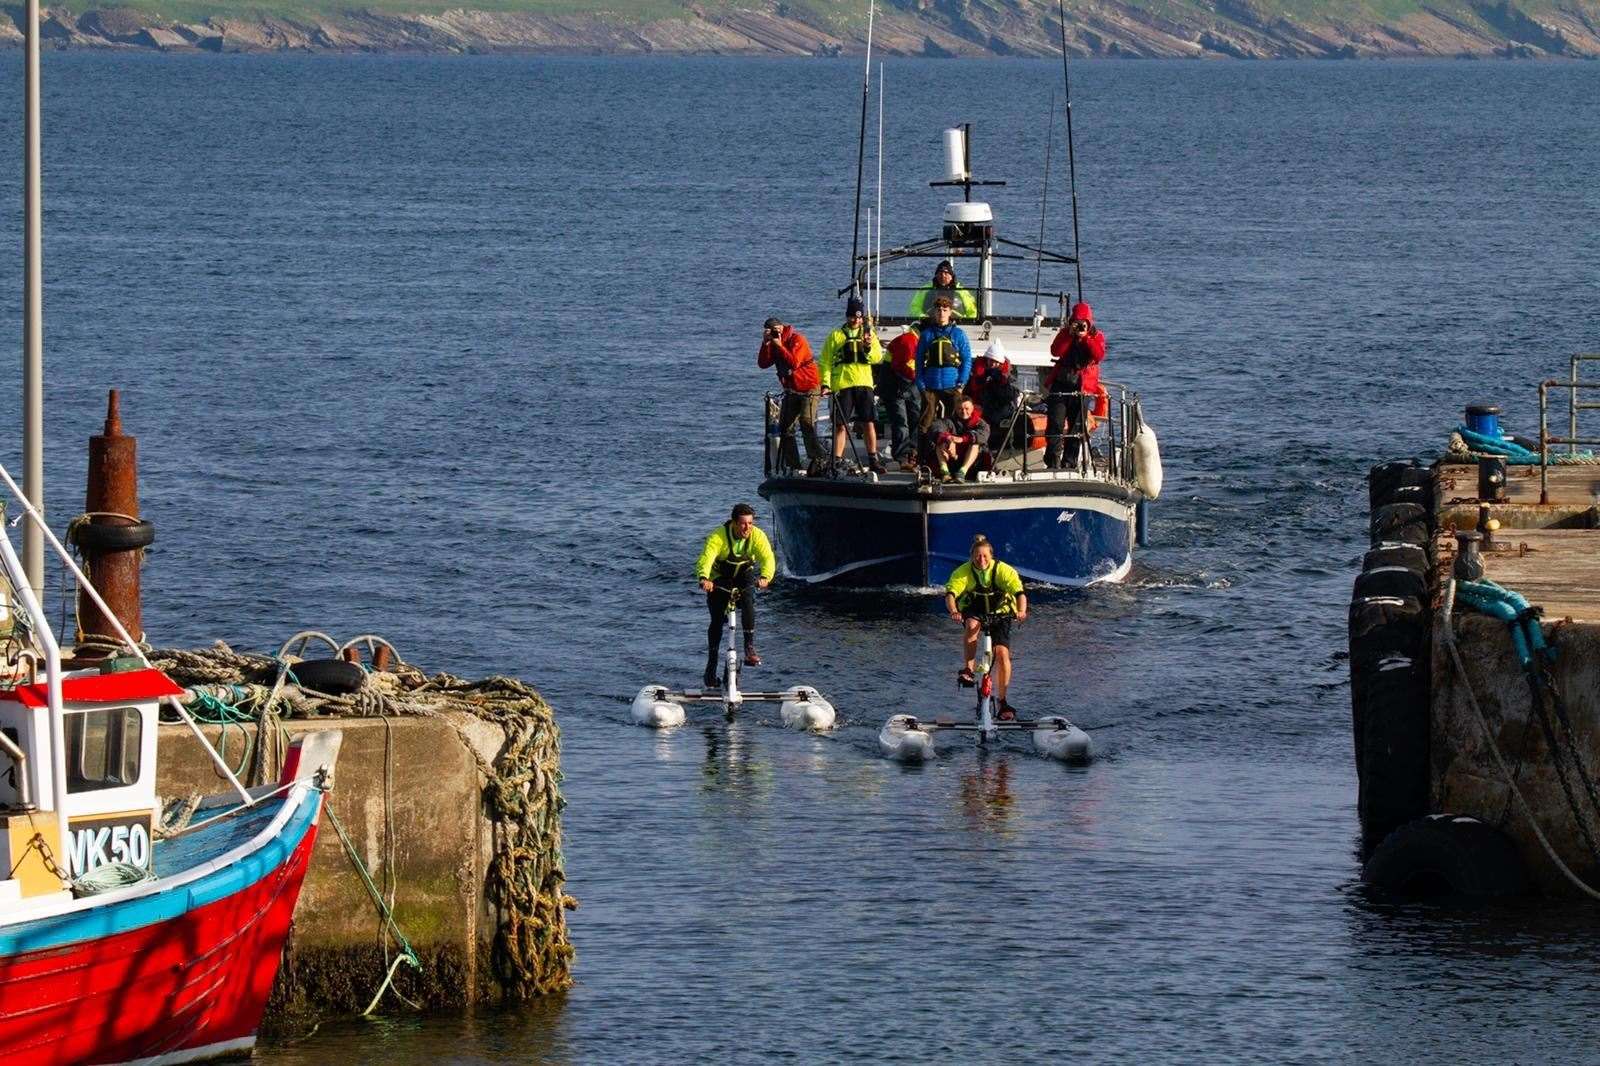 Pedal 4 Parks team members arriving in John O'Groats harbour on Saturday after pedalling over from Burwick. Picture: Poul Brix